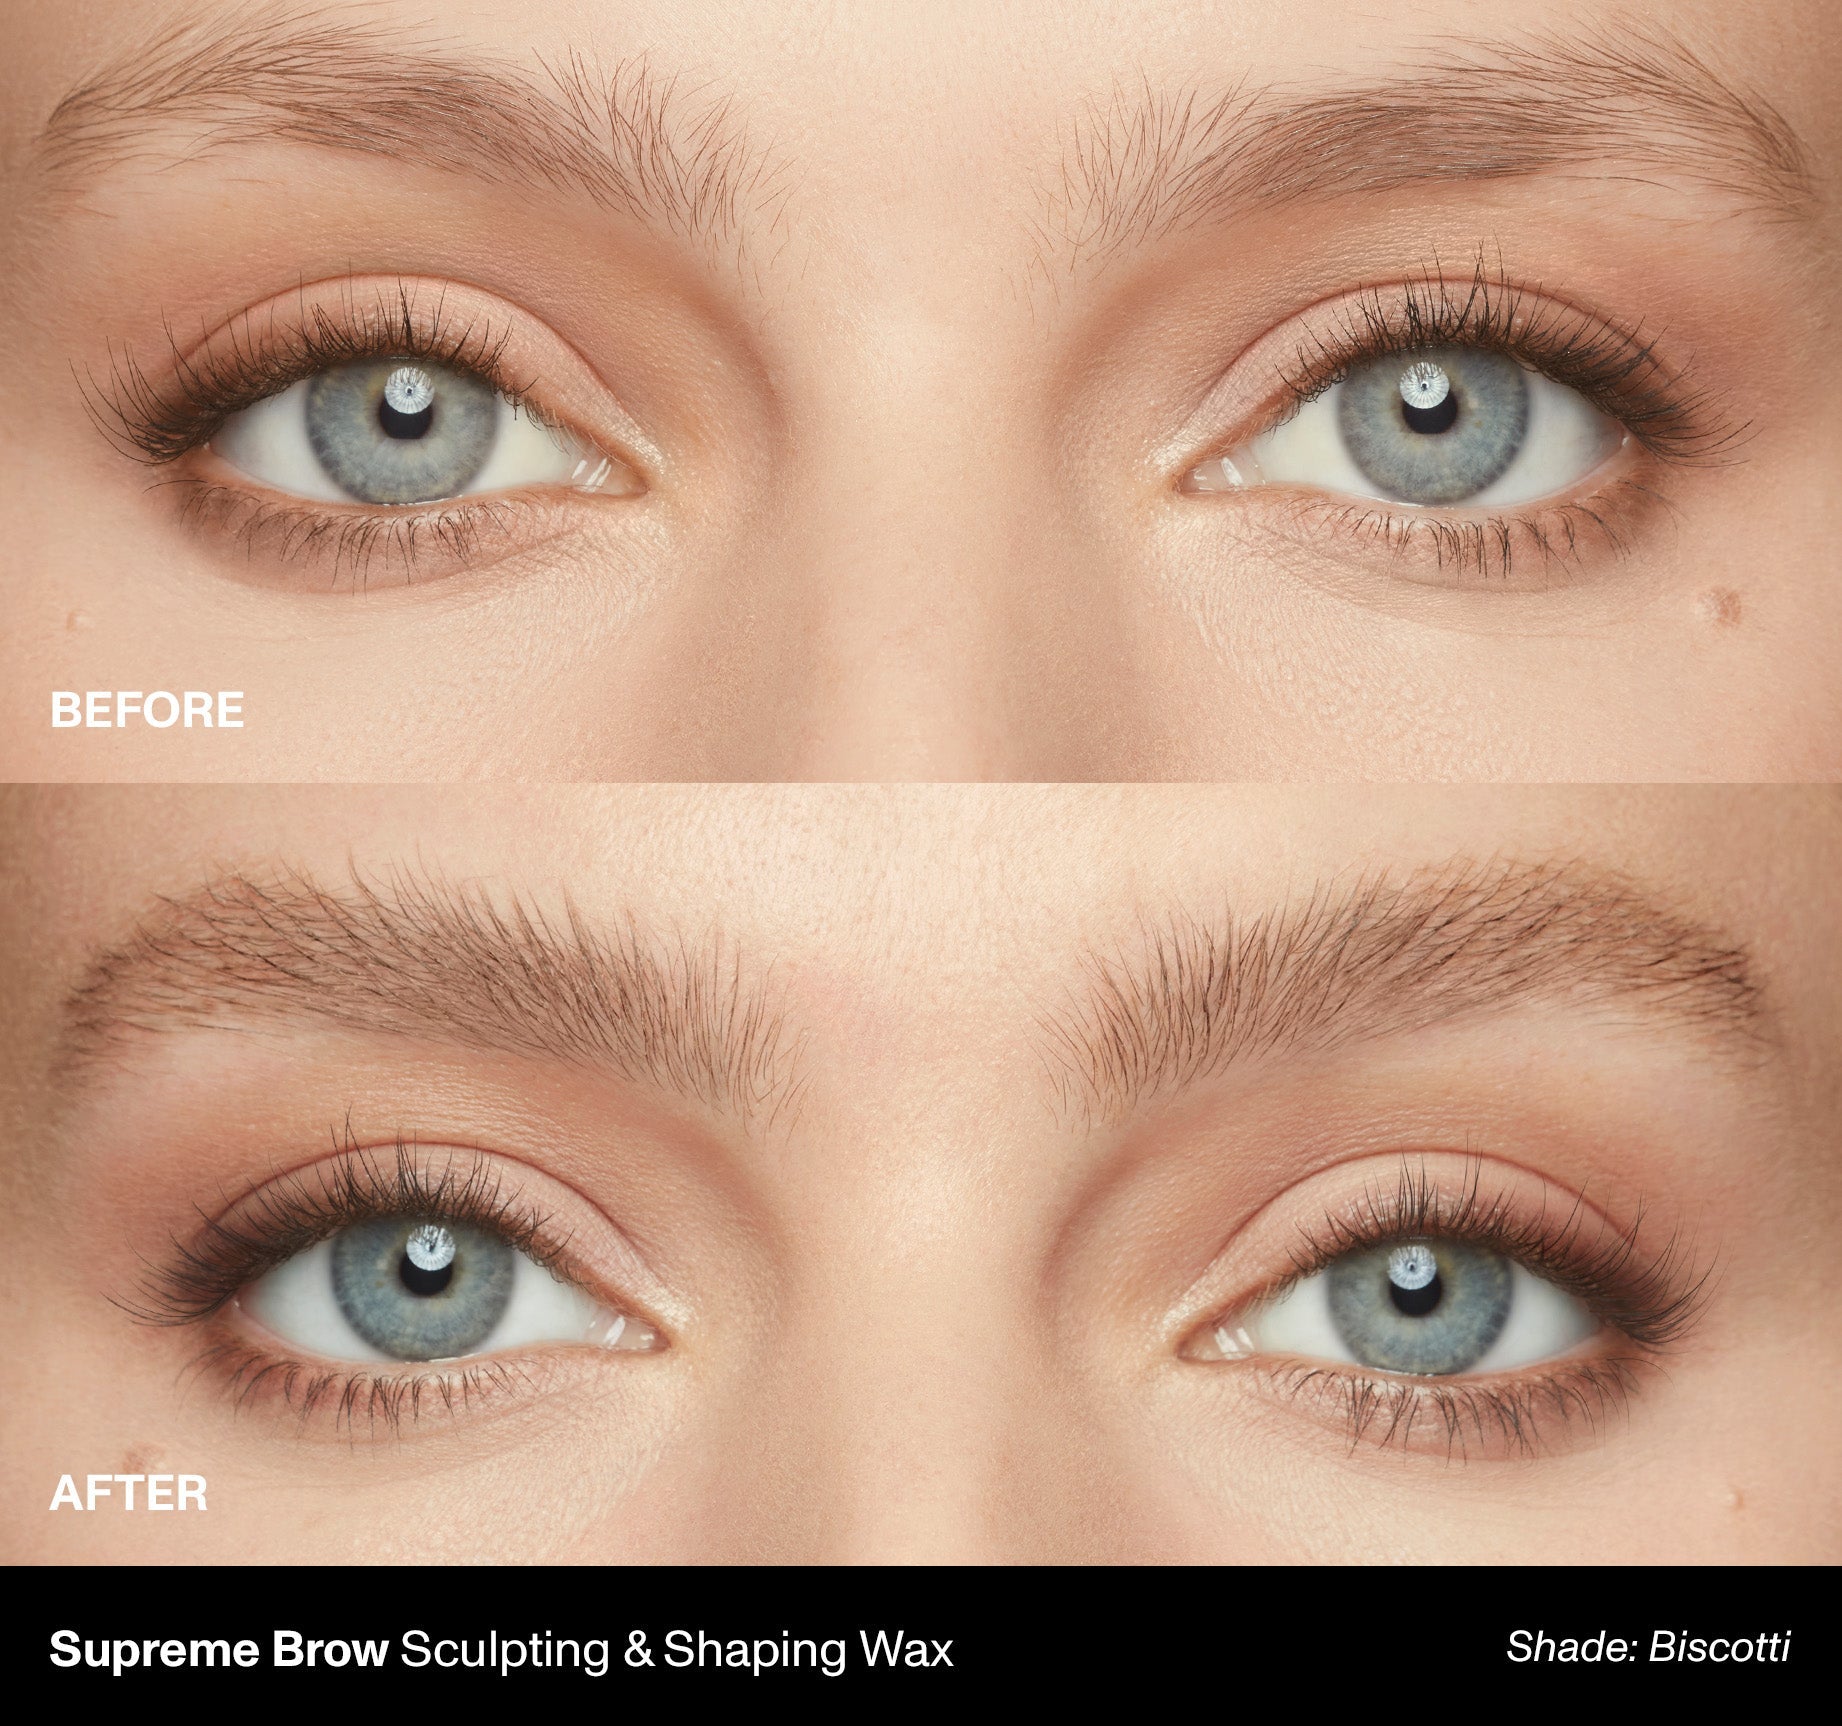 Supreme Brow Sculpting And Shaping Wax - Biscotti - Image 5